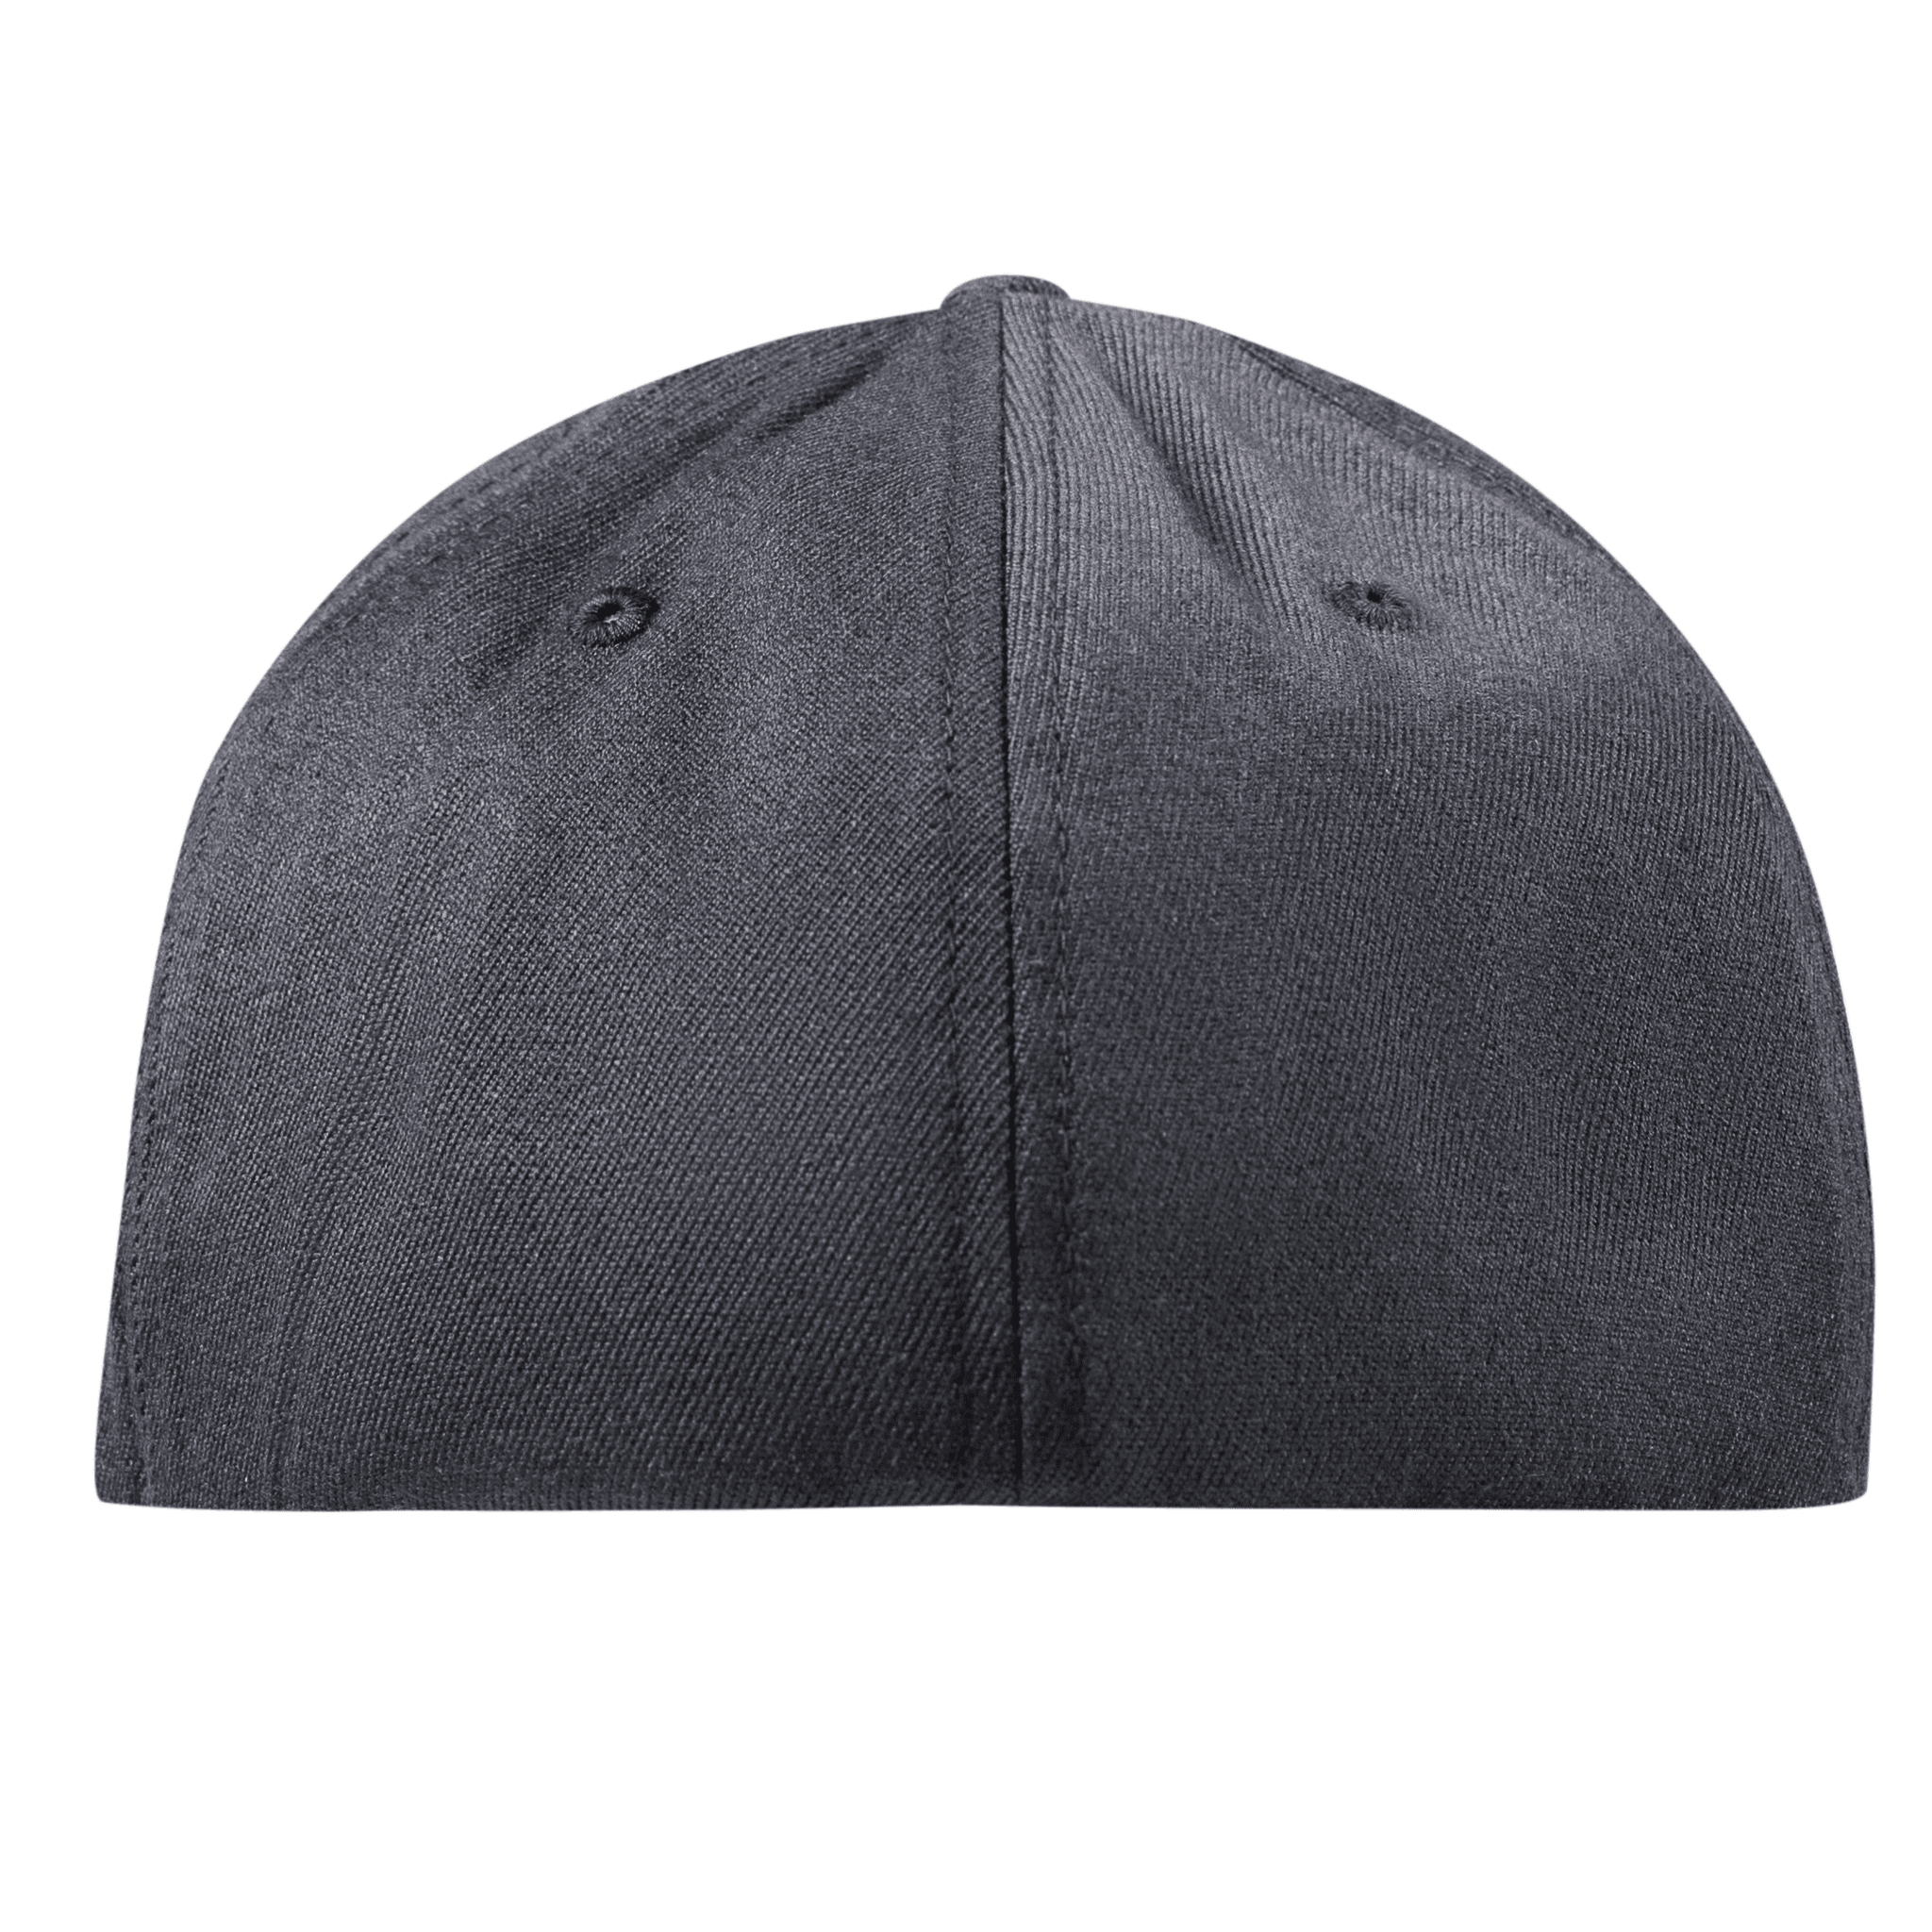 New Jersey 3 Midnight Flexfit Fitted Back Charcoal